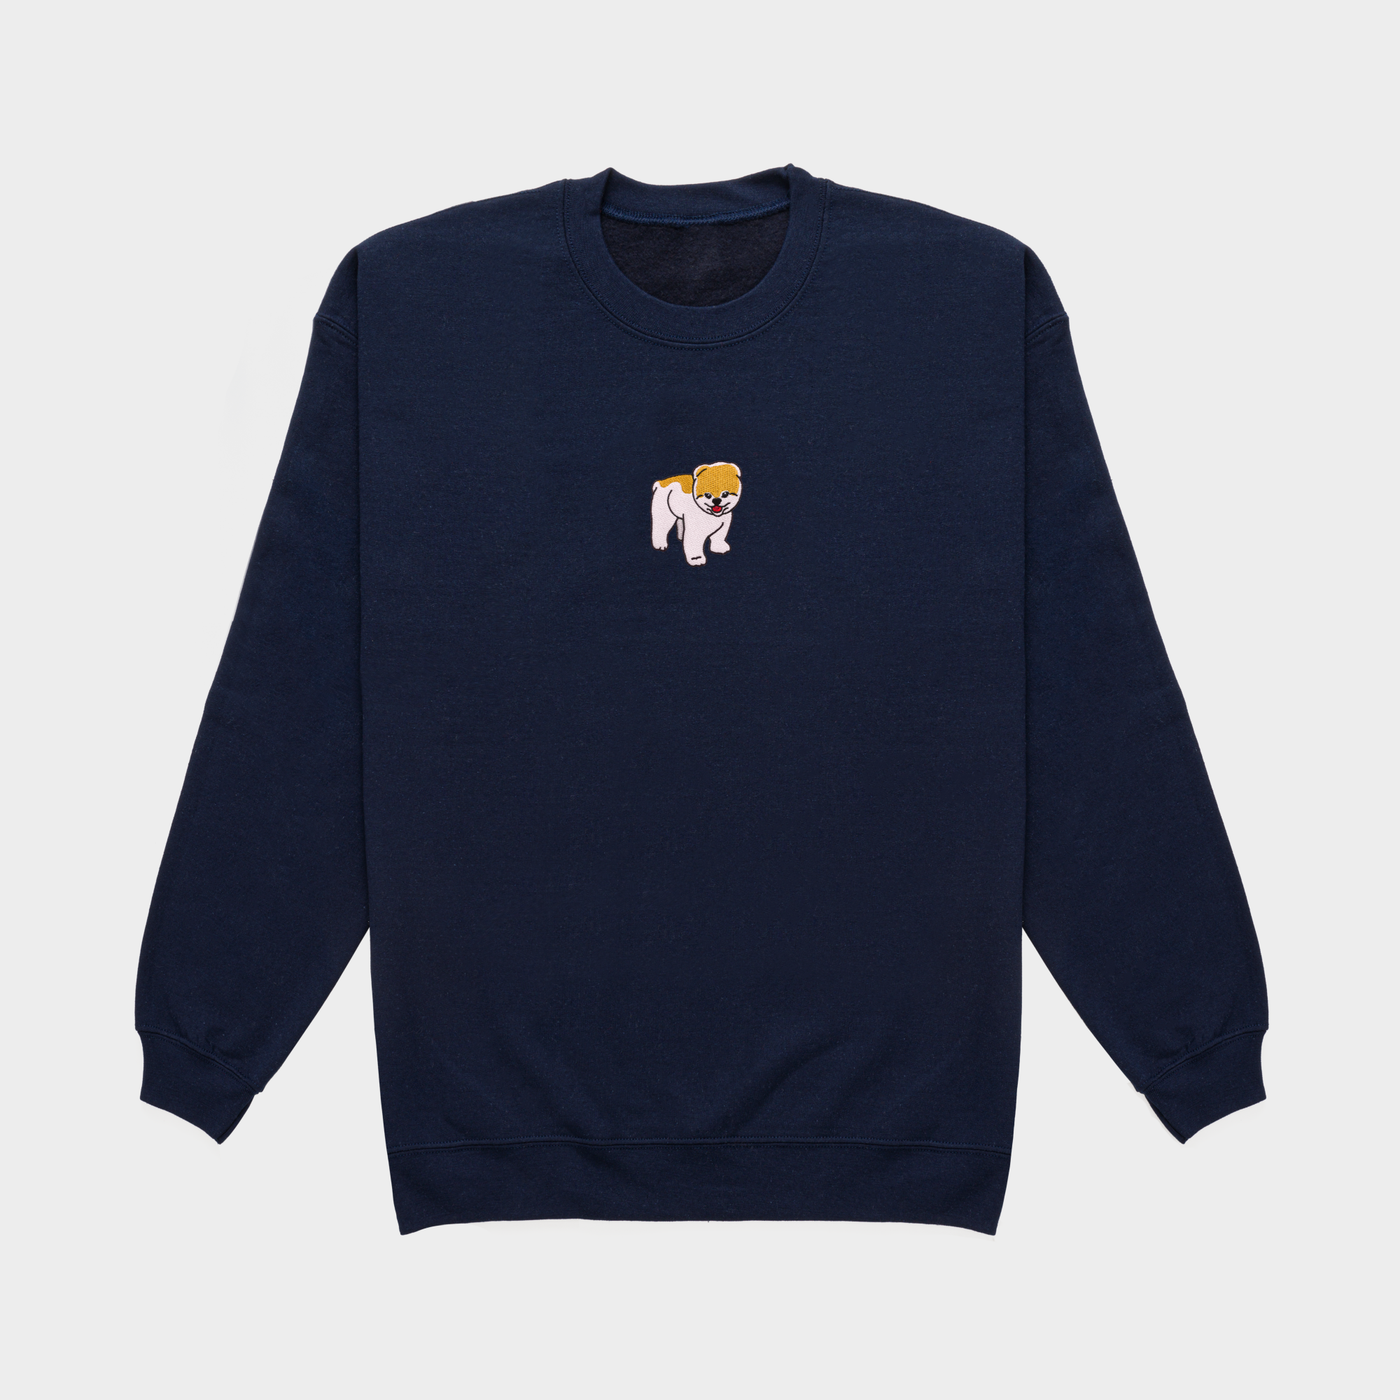 Bobby's Planet Women's Embroidered Pomeranian Sweatshirt from Paws Dog Cat Animals Collection in Navy Color#color_navy